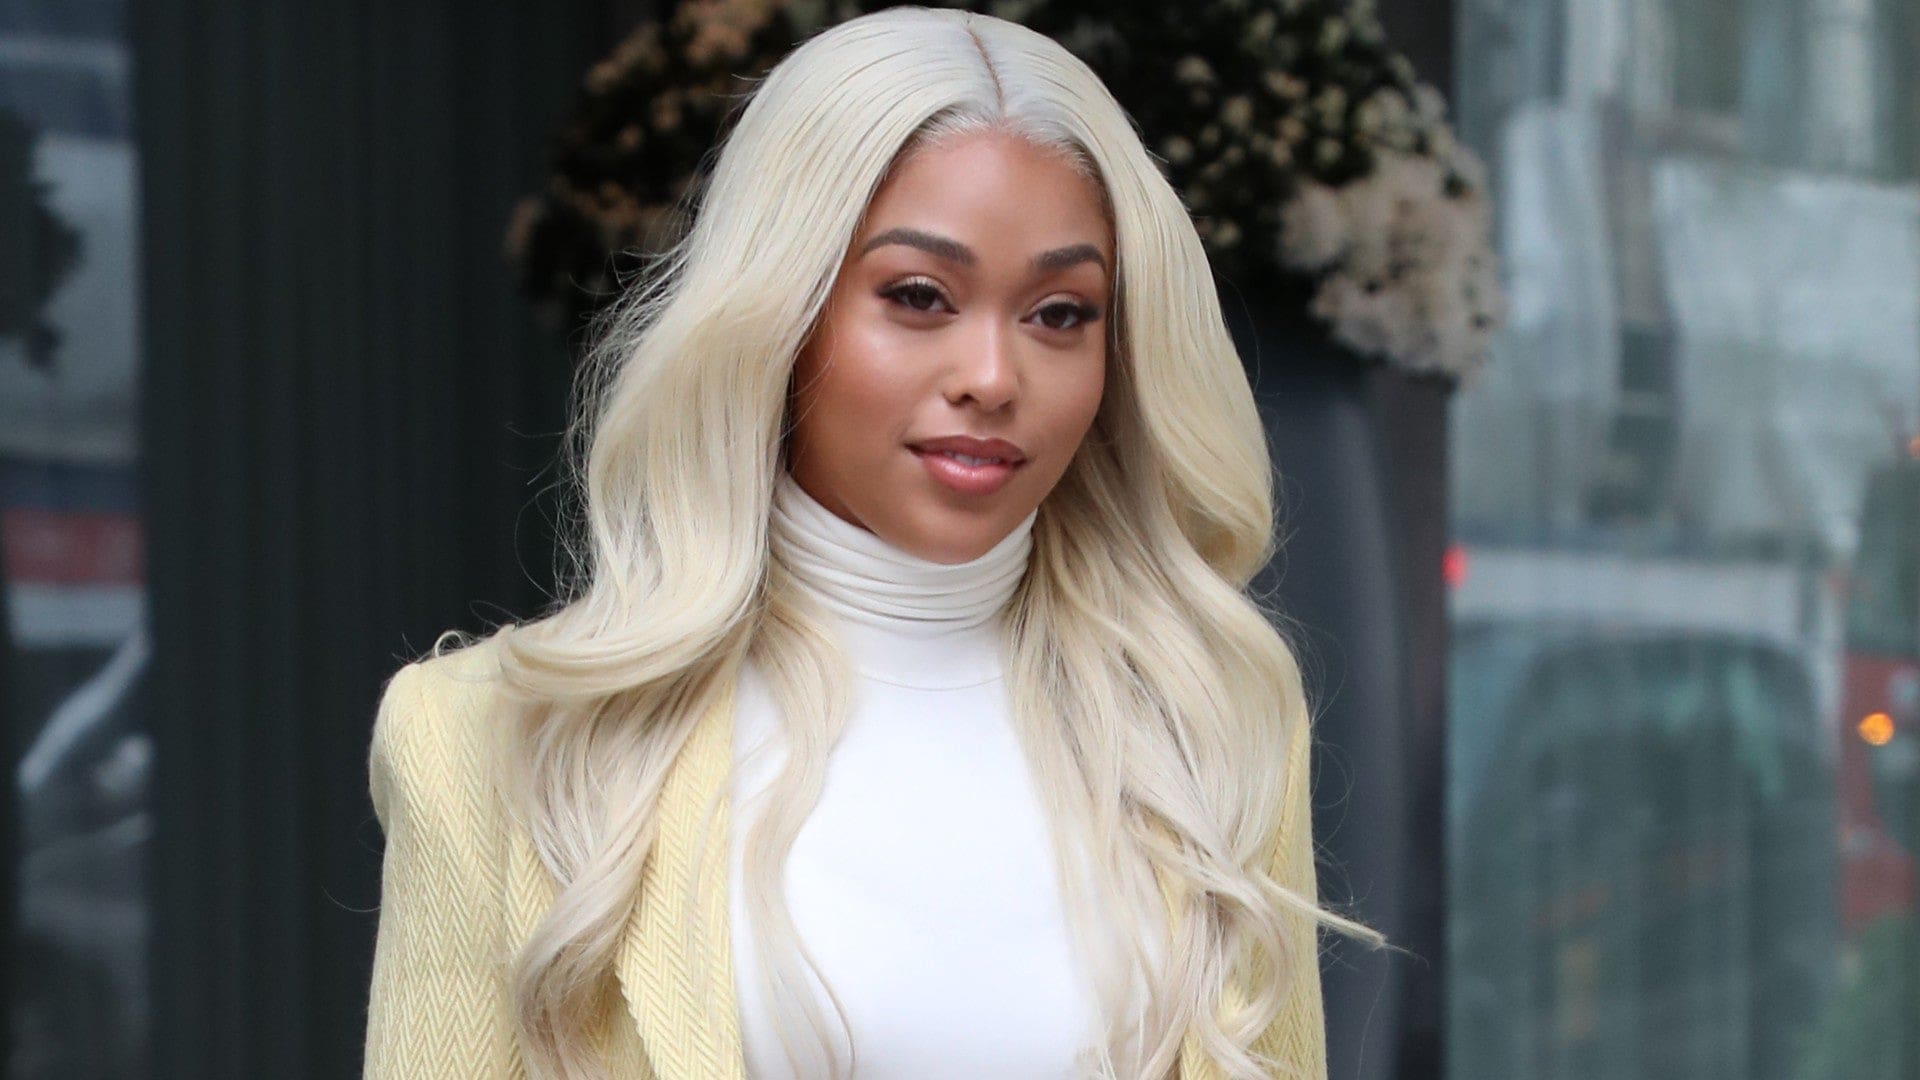 Jordyn Woods Makes Fans Happy With These Latest Photos